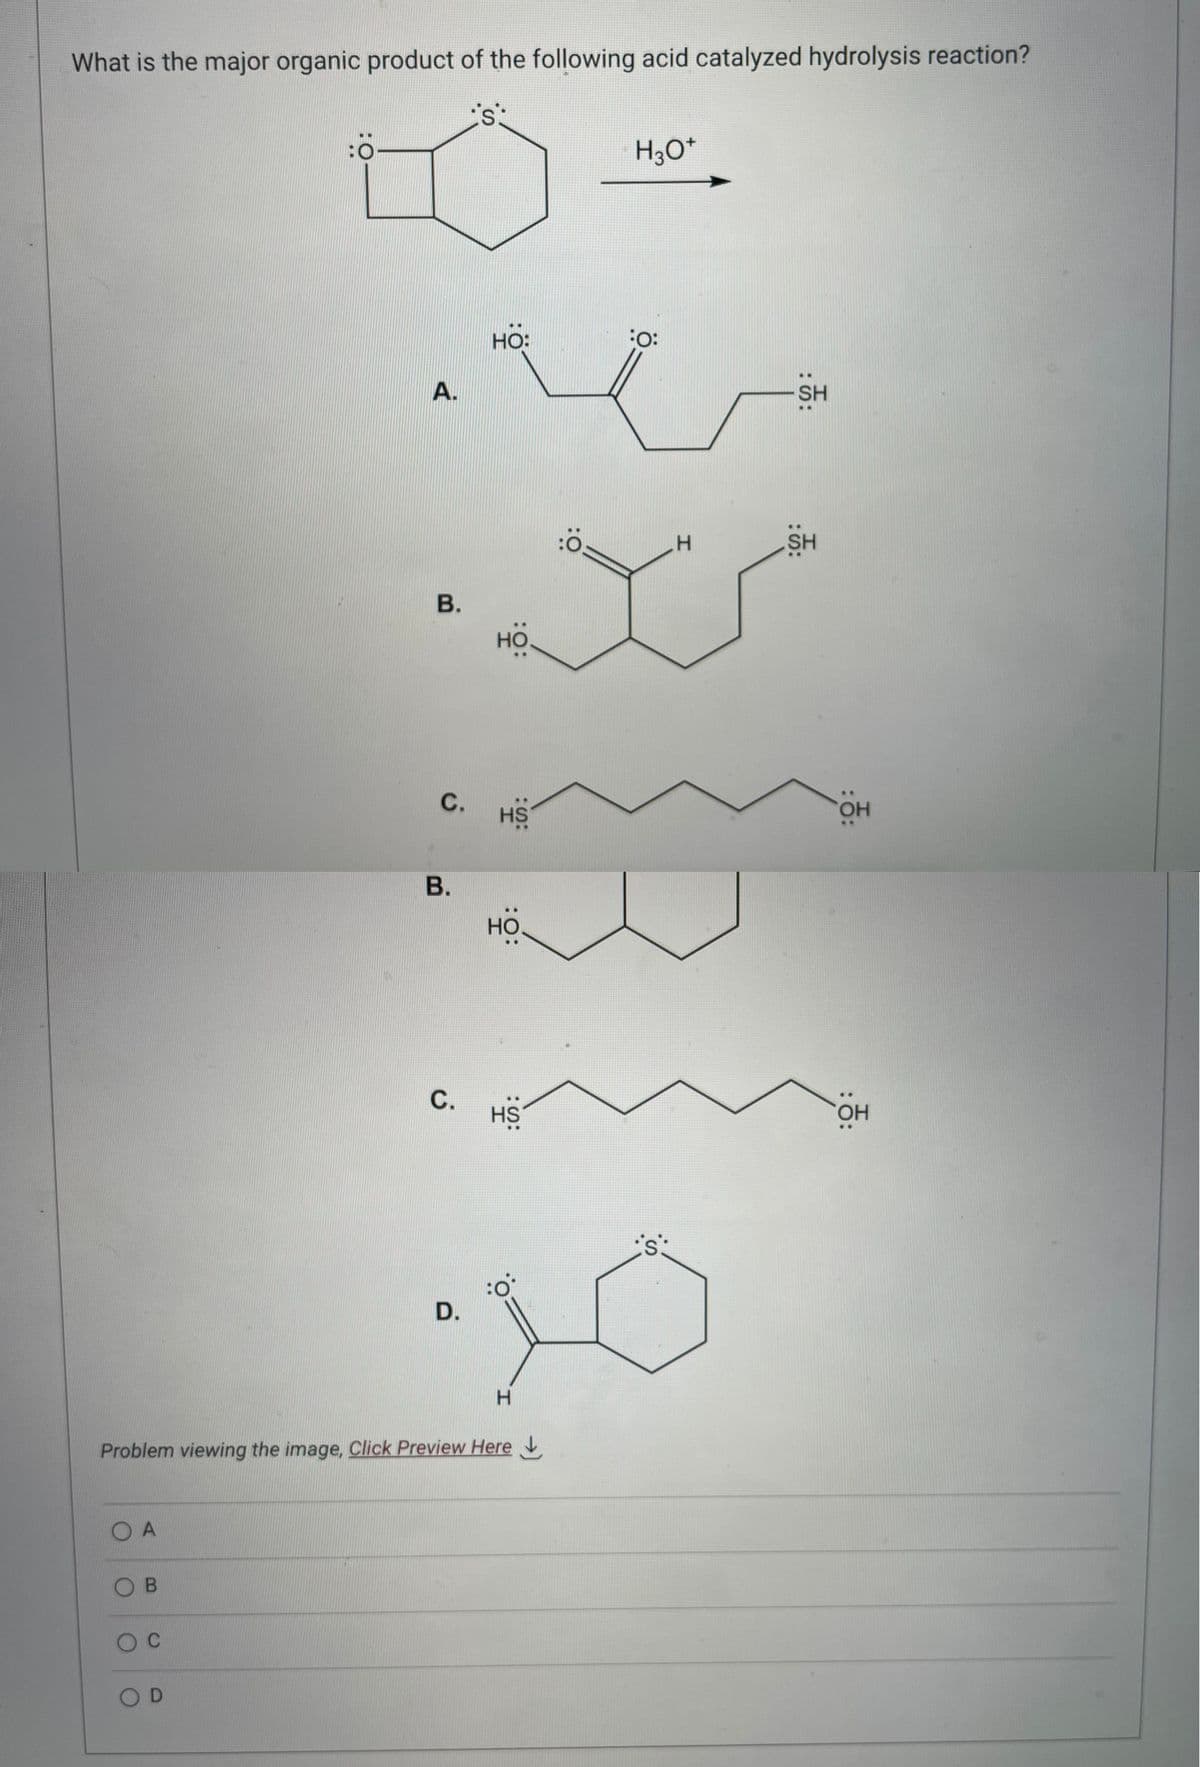 What is the major organic product of the following acid catalyzed hydrolysis reaction?
is:
OA
OB
O C
:0
OD
A.
B.
C.
B.
C.
HO:
D.
HO
HS
:
Problem viewing the image, Click Preview Here
HO
HS
Ö:
H3O*
:O:
·10
H
H
:():
SH
SH
: 0:
OH
: 0:
OH